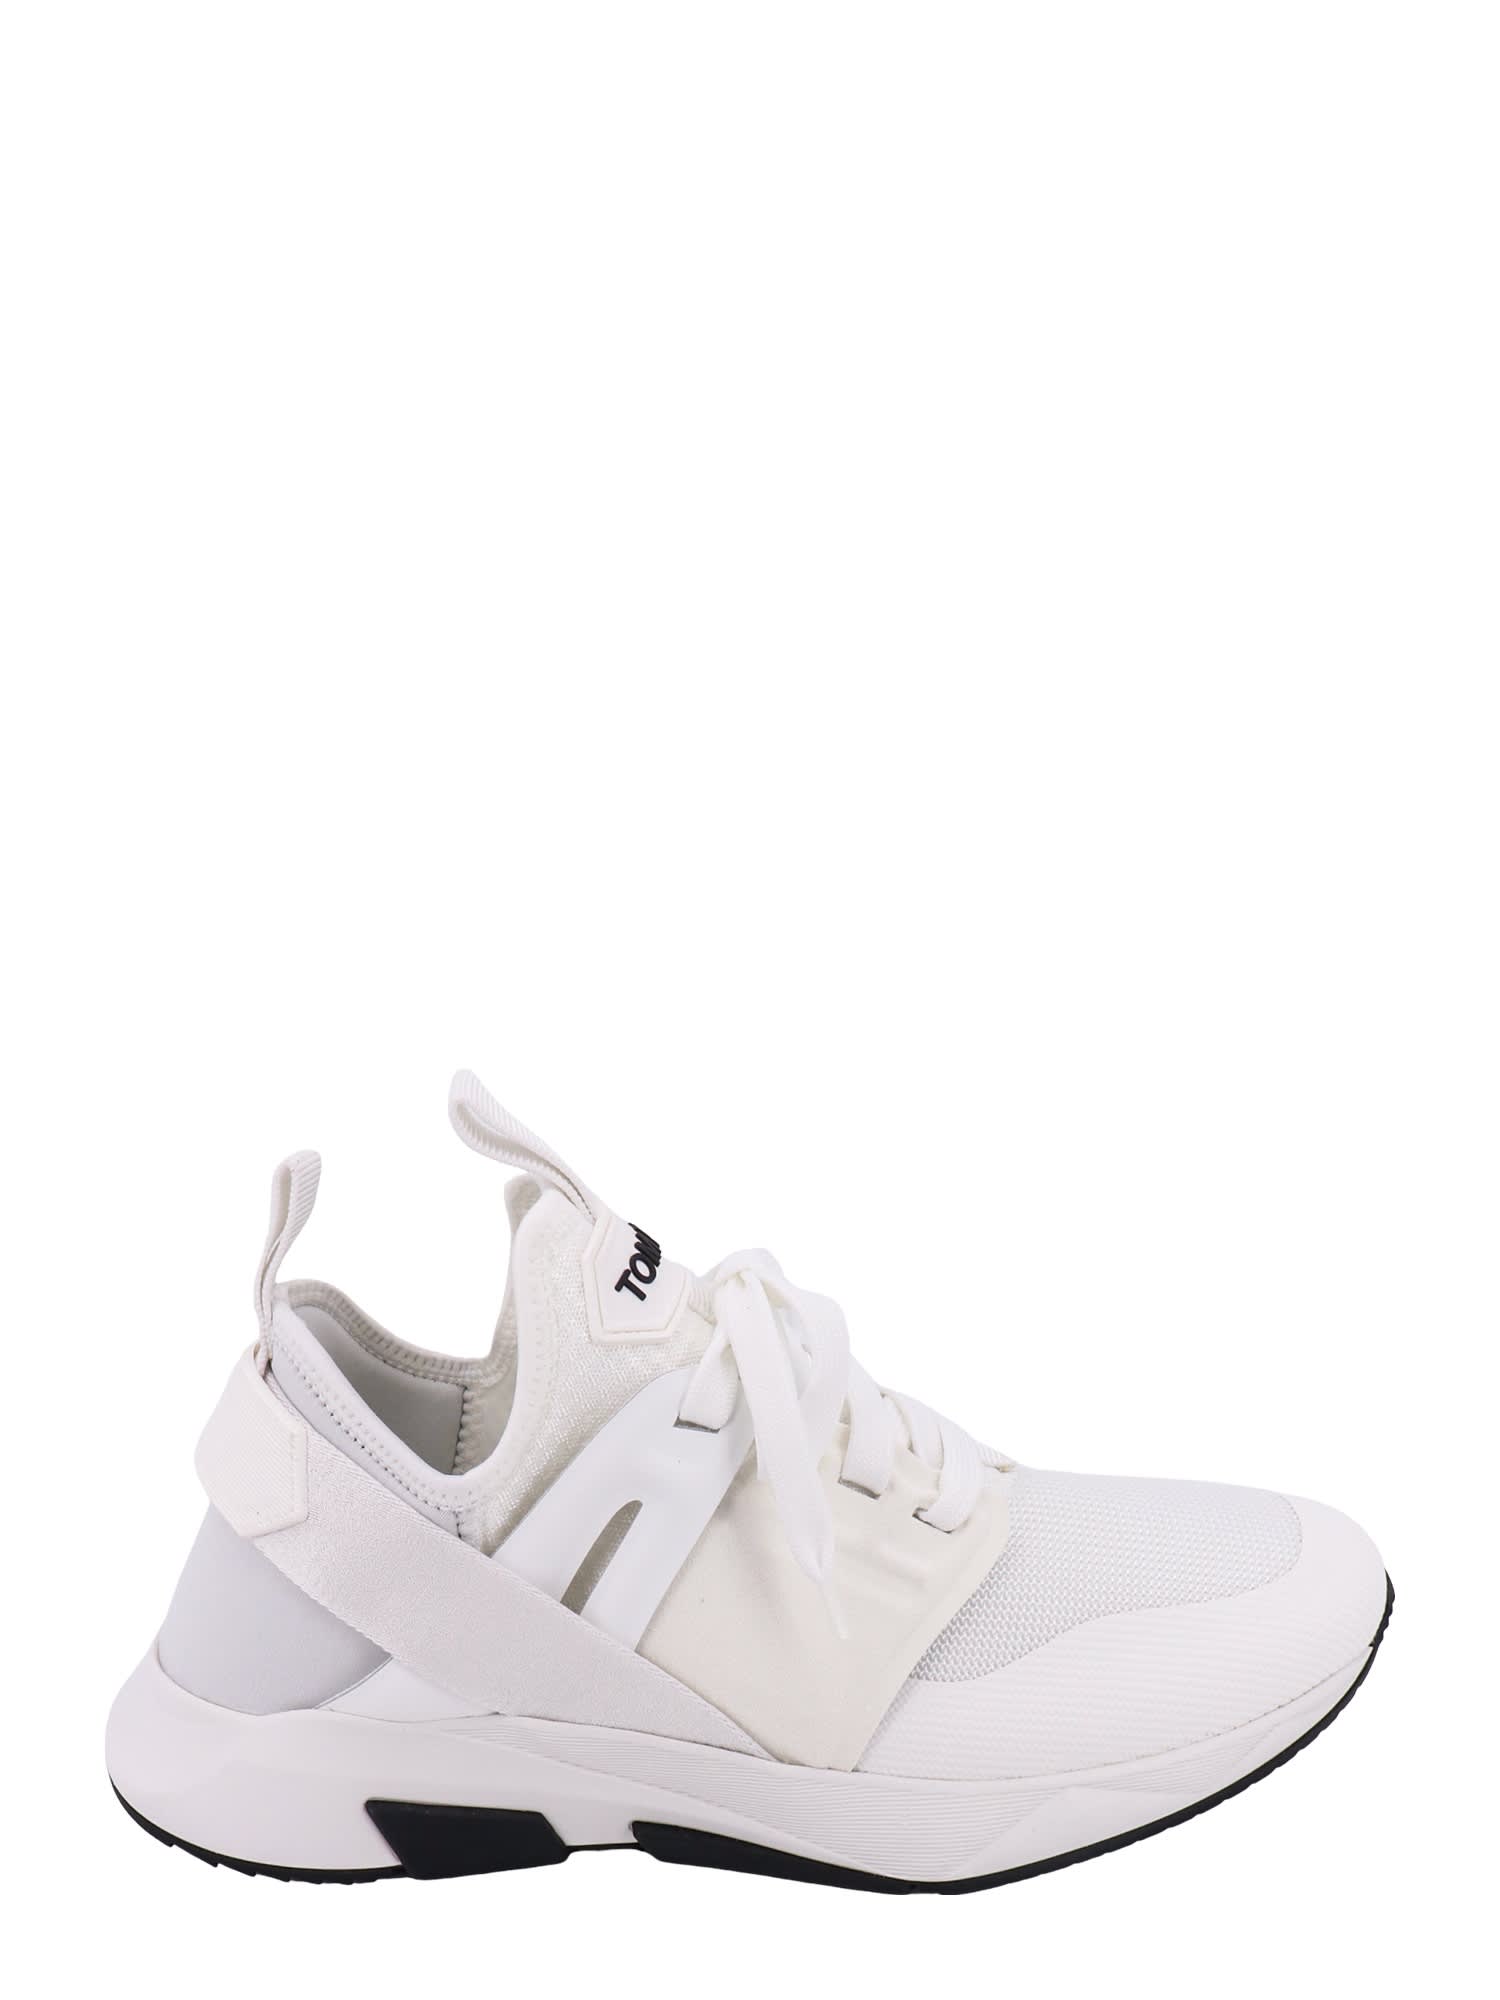 Tom Ford Jago Sneakers In White